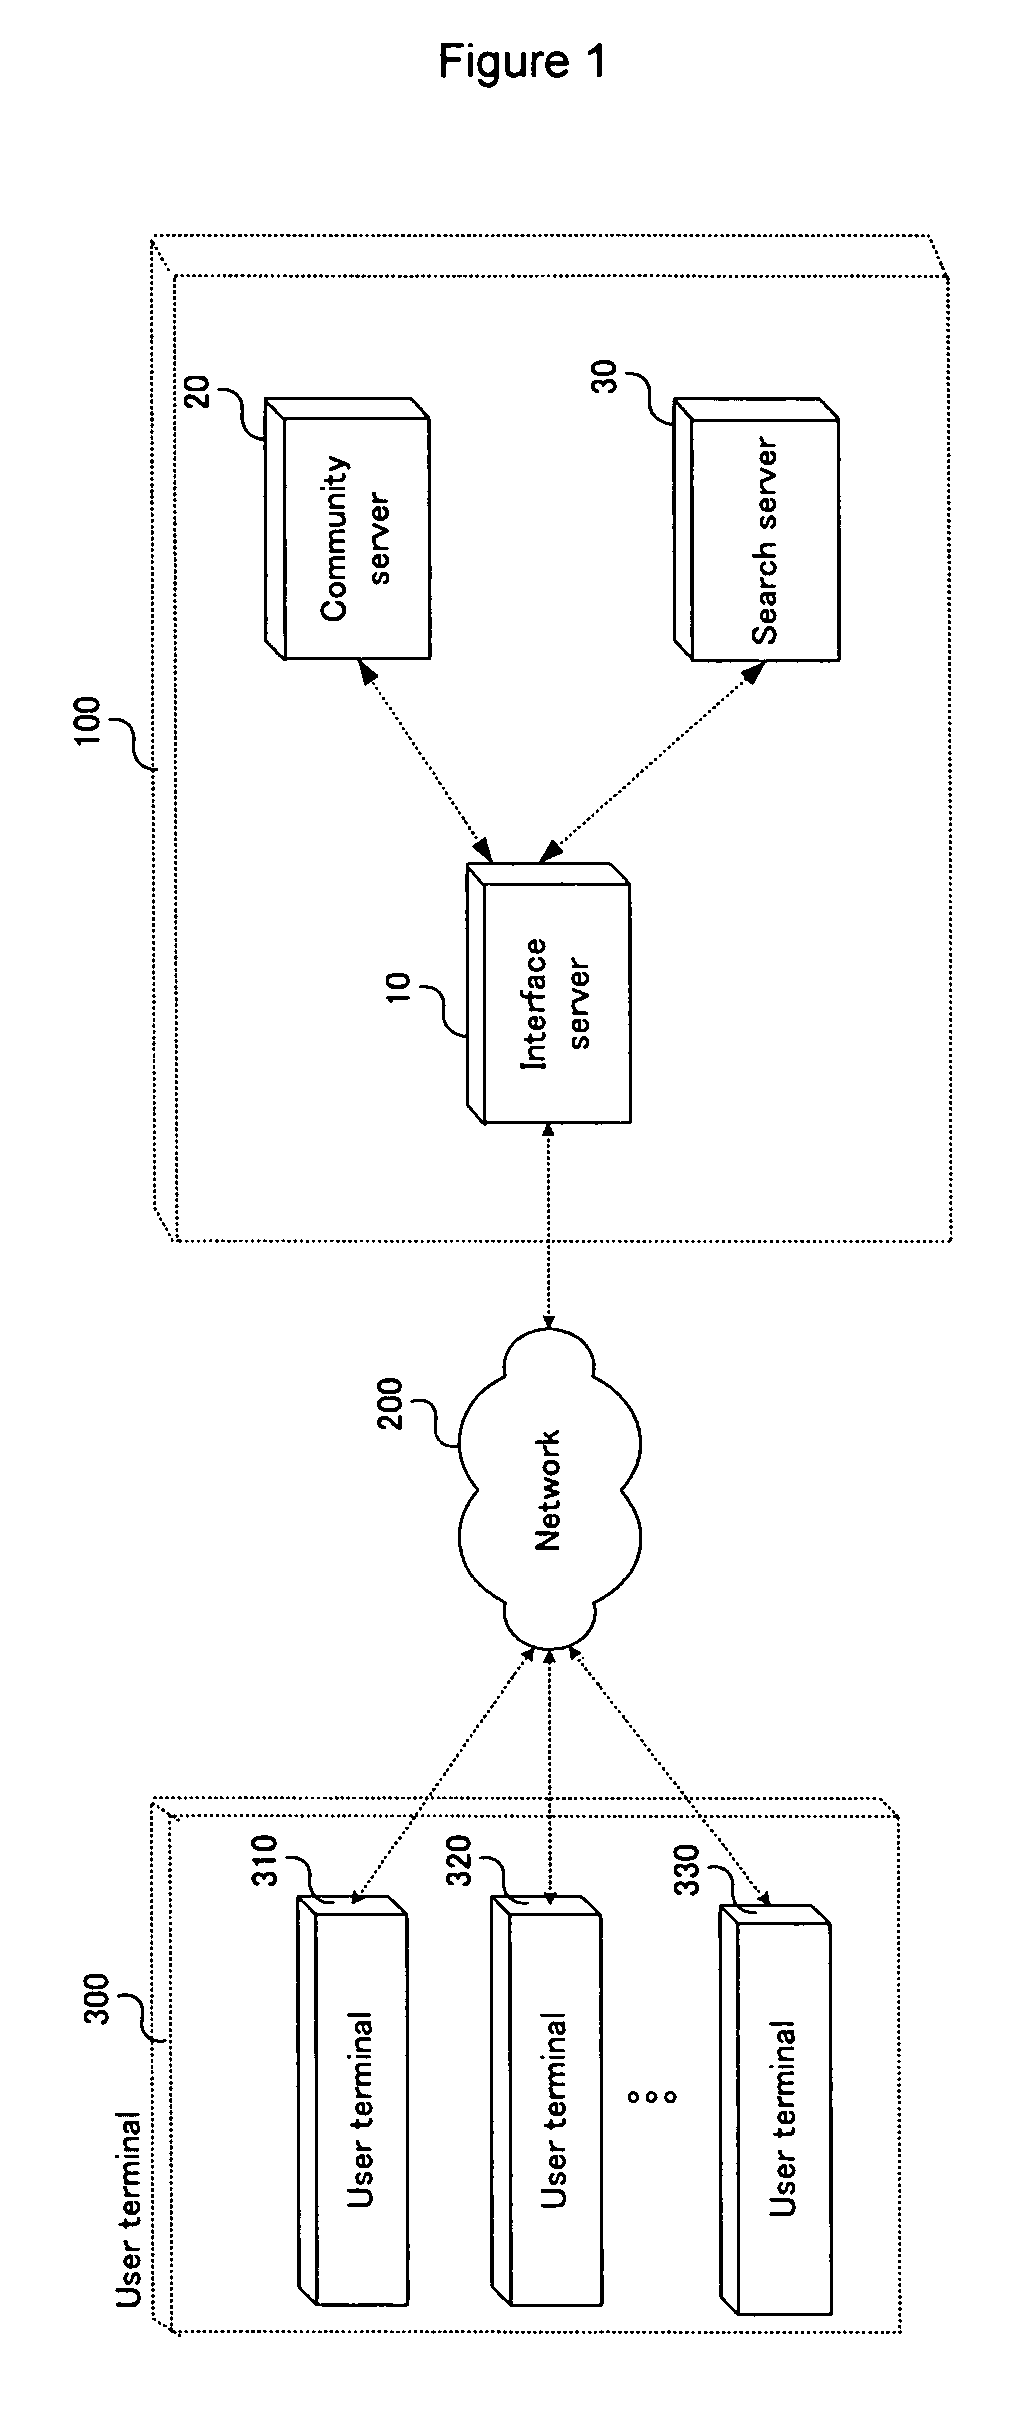 Community search system through network and method thereof